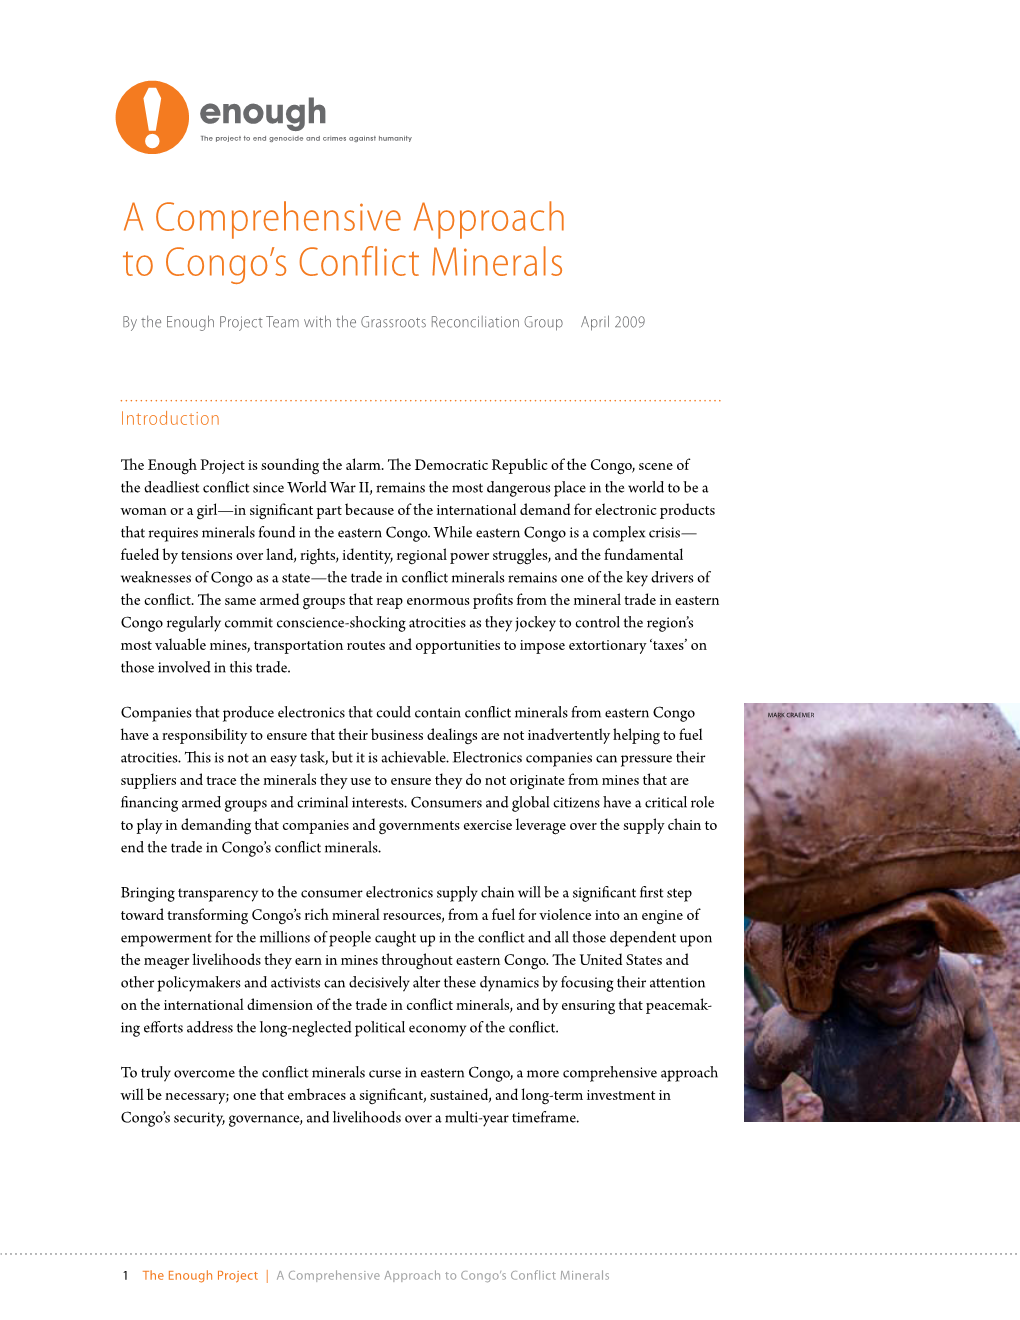 A Comprehensive Approach to Congo's Conflict Minerals